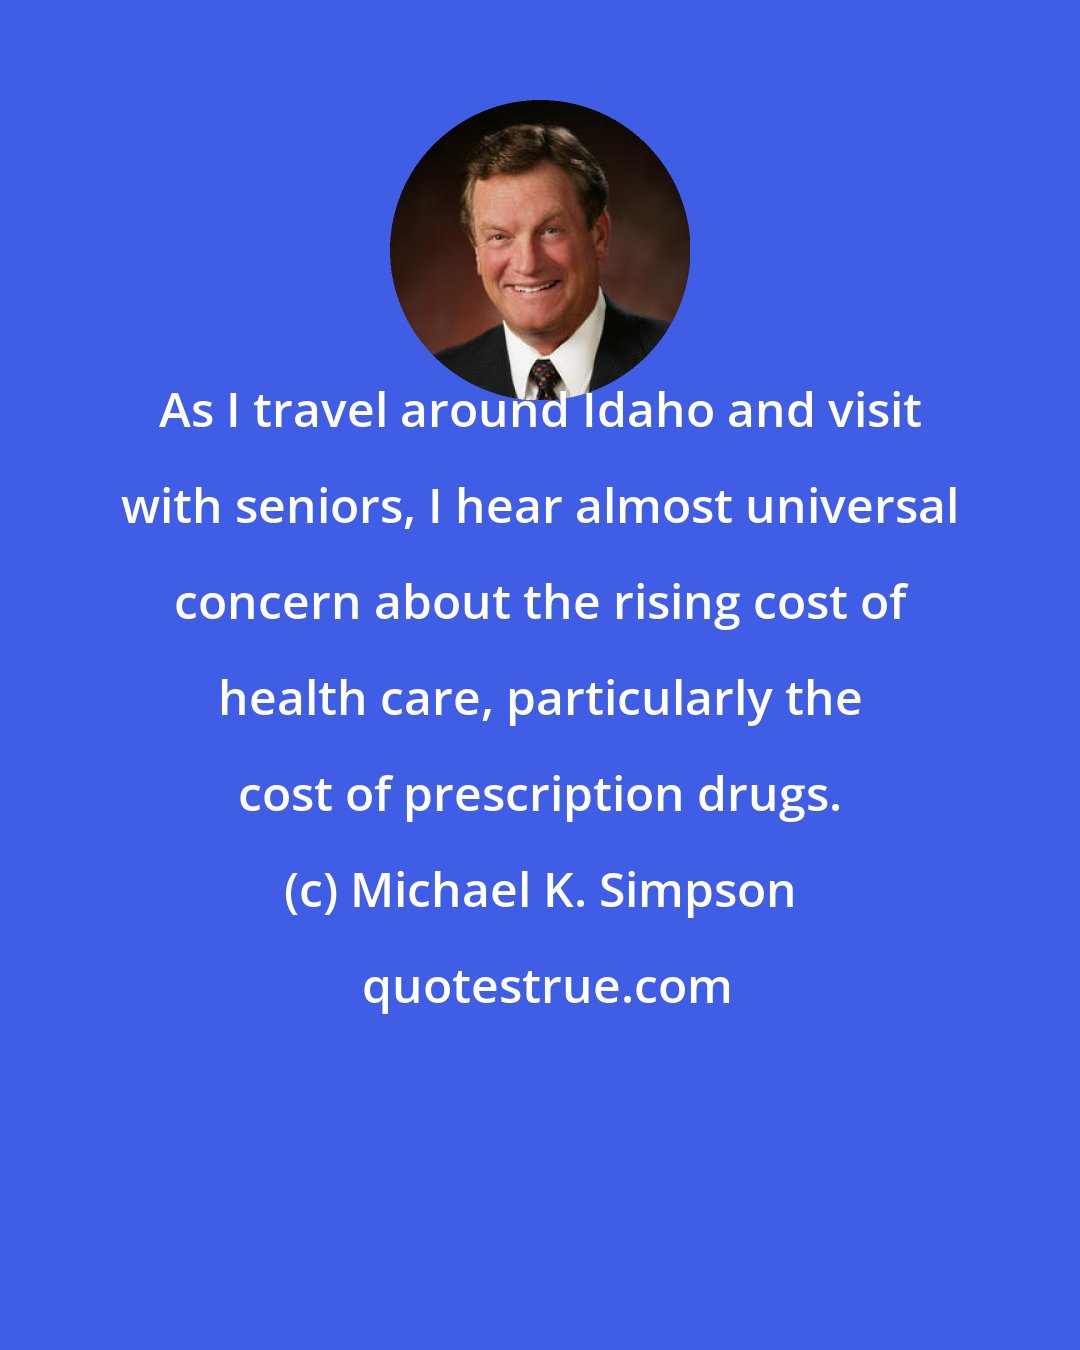 Michael K. Simpson: As I travel around Idaho and visit with seniors, I hear almost universal concern about the rising cost of health care, particularly the cost of prescription drugs.